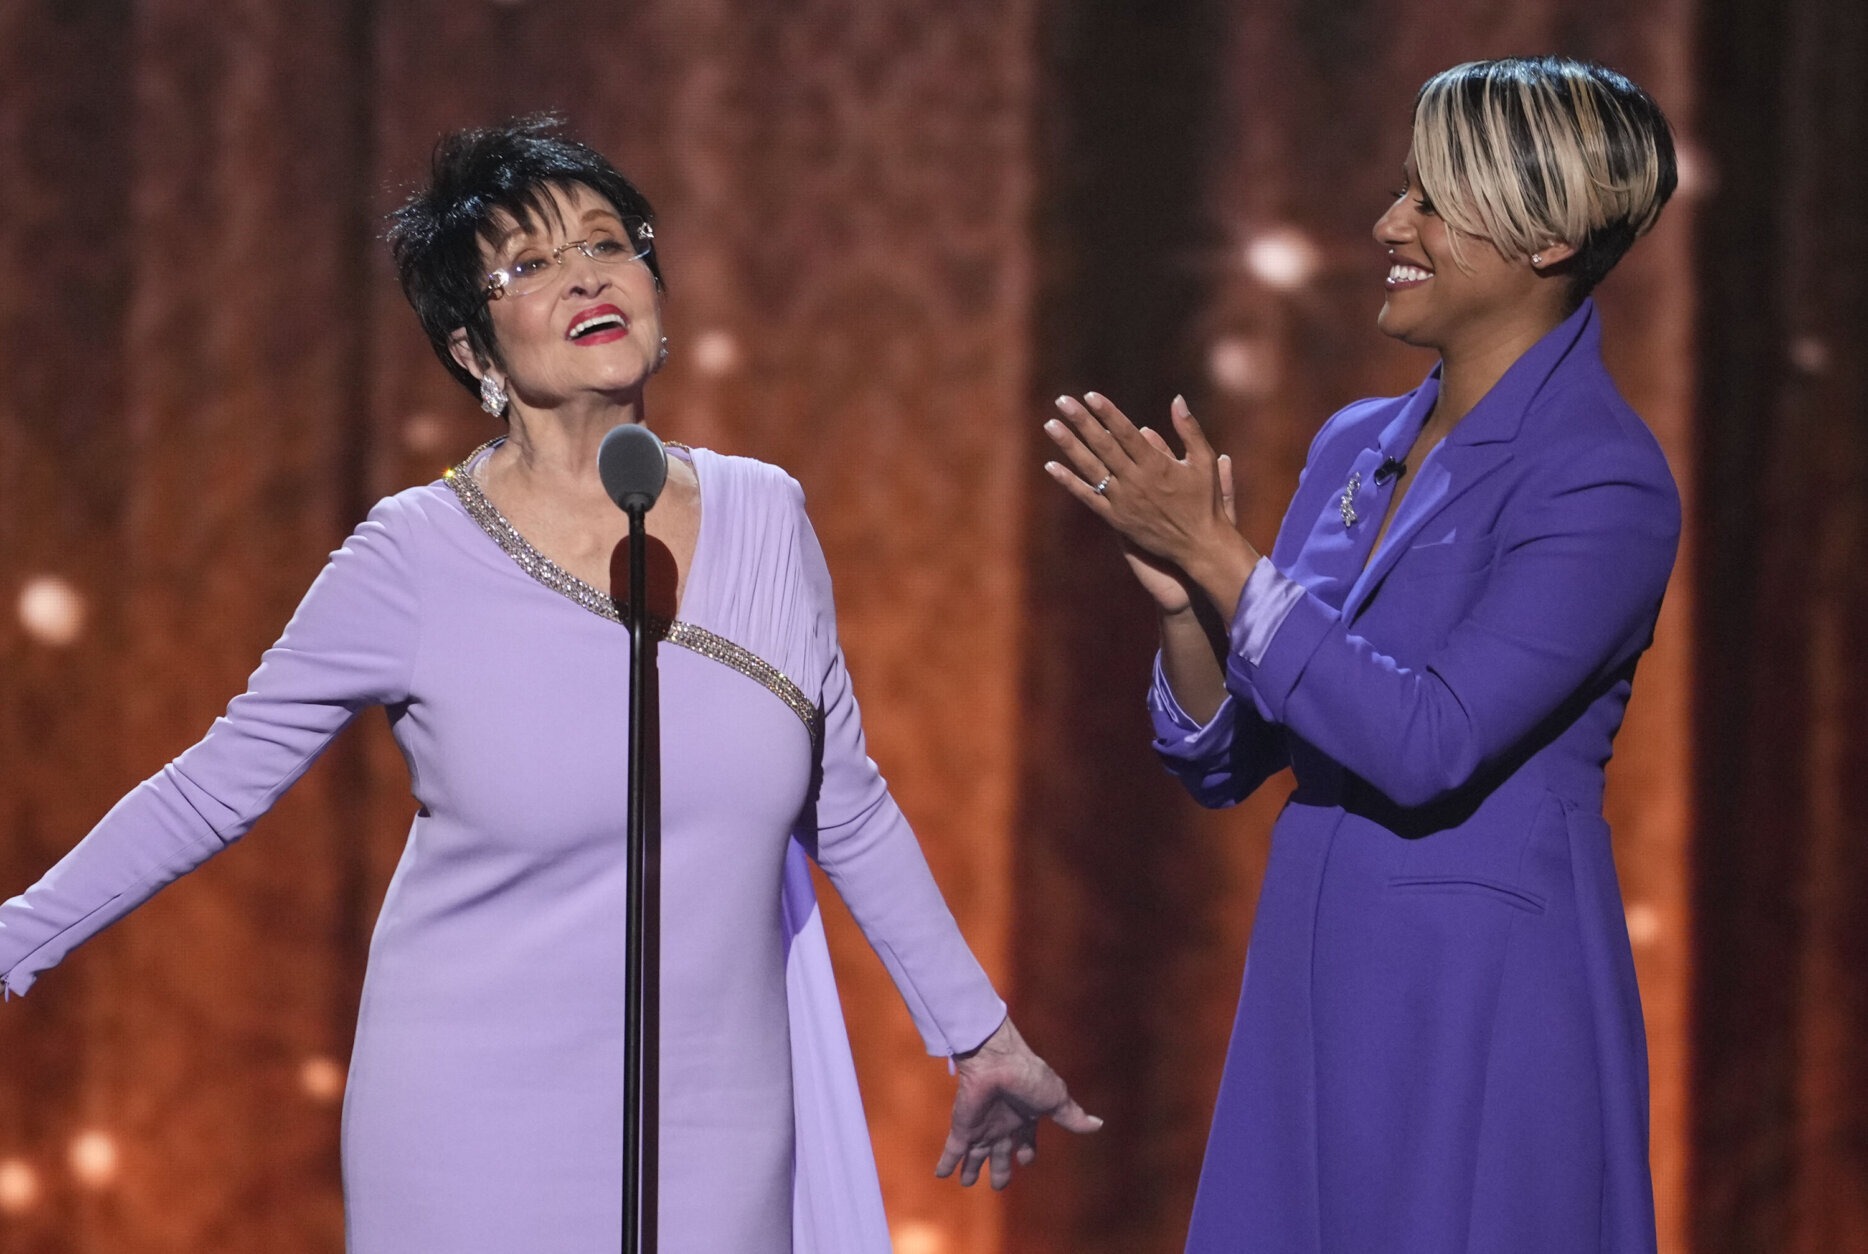 Chita Rivera, left, and Ariana DeBose present the award for best new musical at the 75th annual Tony Awards on Sunday, June 12, 2022, at Radio City Music Hall in New York. (Photo by Charles Sykes/Invision/AP)